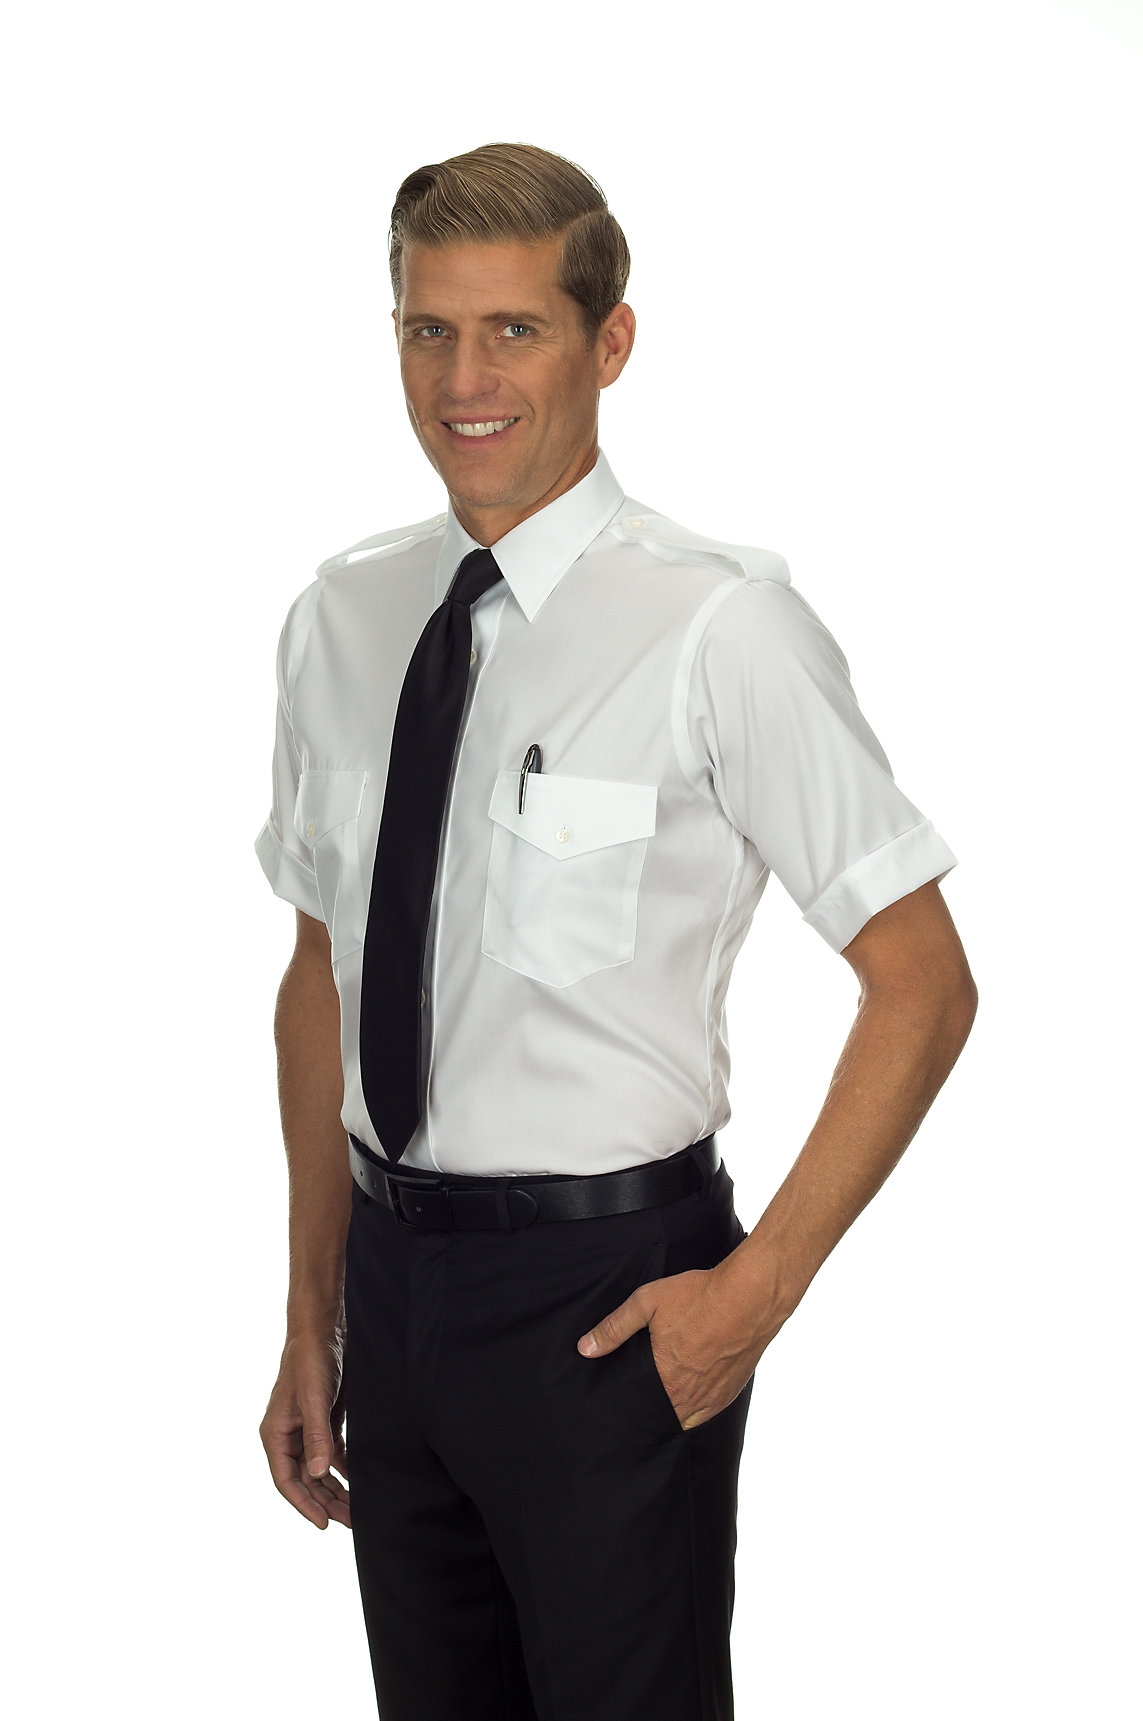 "THE AVIATOR ALL COTTON NON-IRON" NEW from Vanheusen - Regular Fit, Short Sleeve, White Only-246